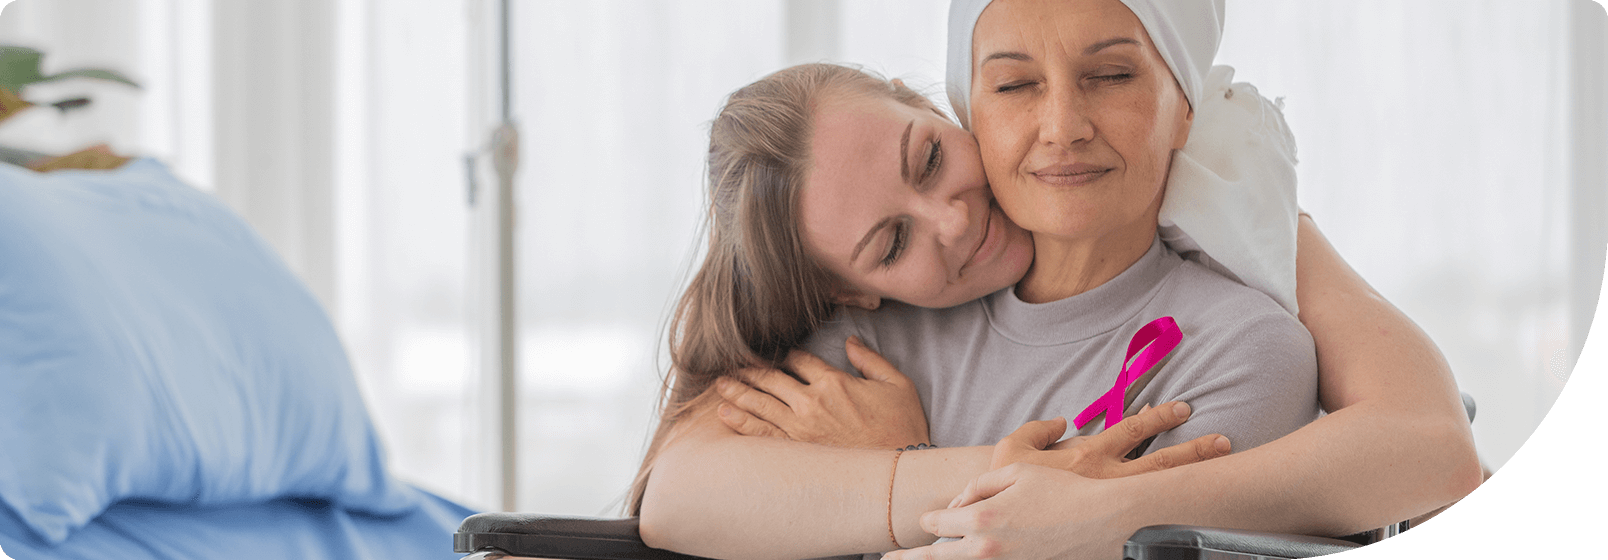 younger woman with her arms around an older woman undergoing chemotherapy for breast cancer